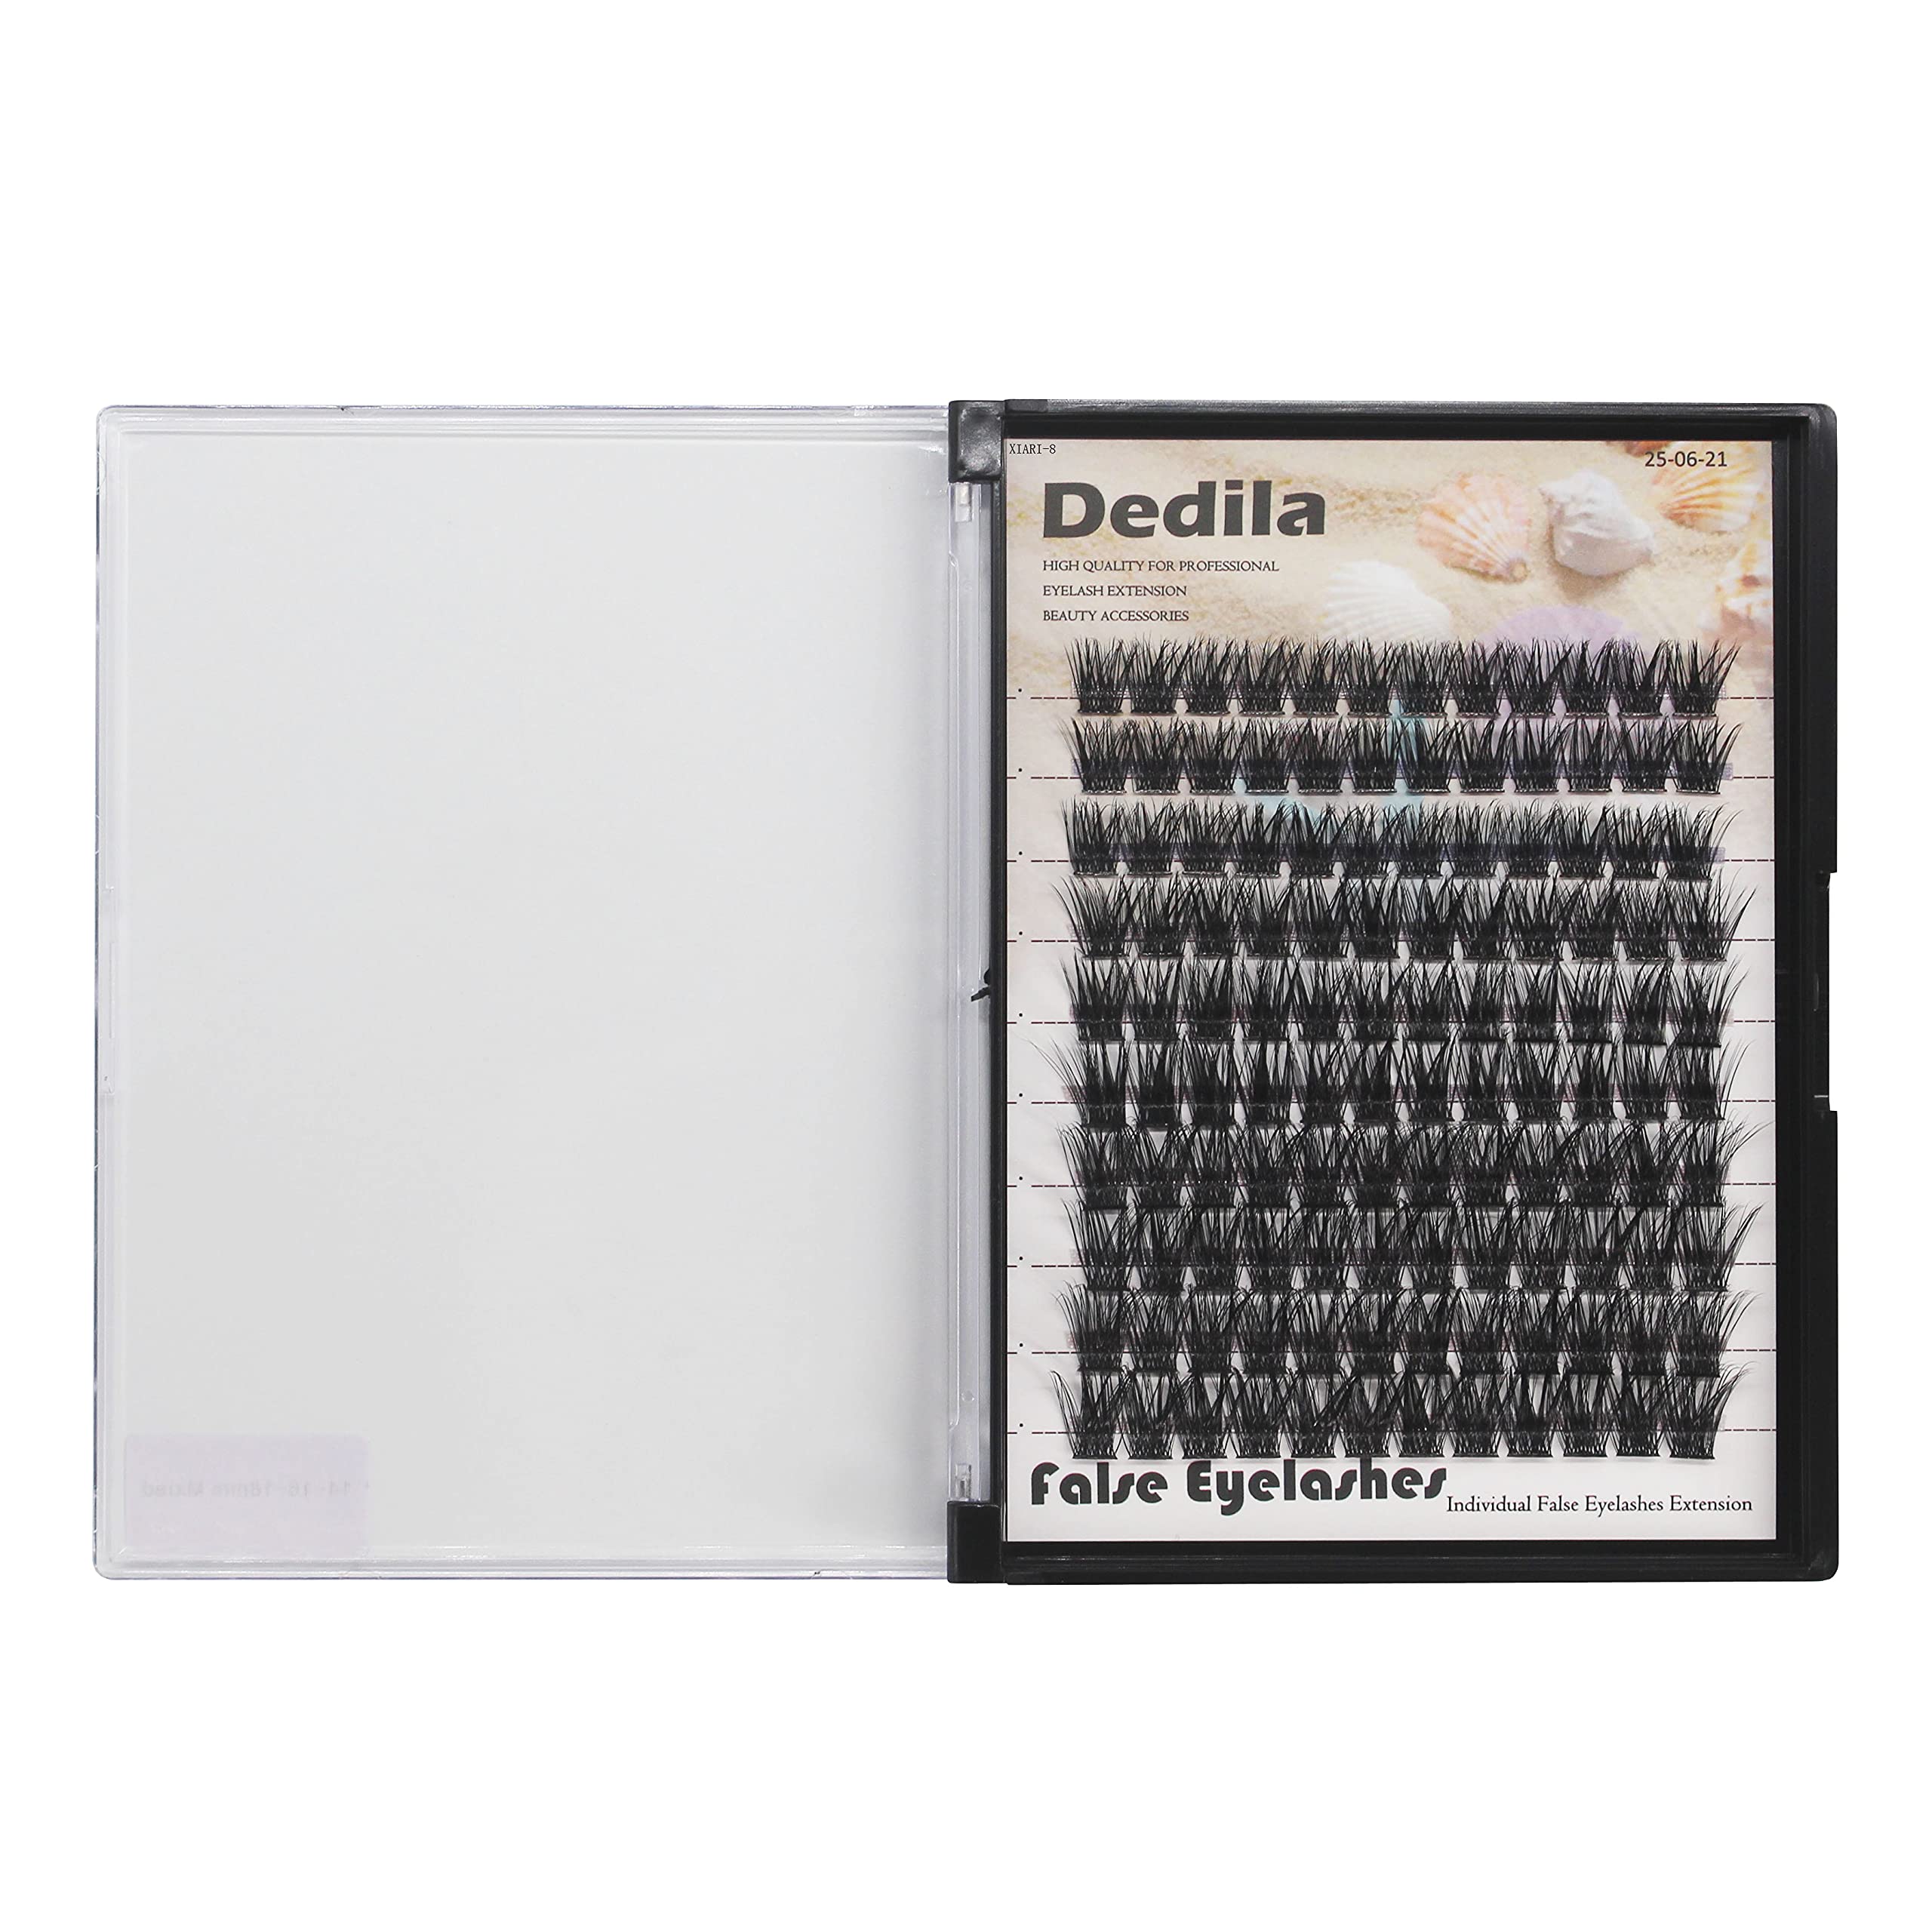 Dedila 120 Pcs Handmade D Curl Makeup Clusters Eye lashes Extensions Mixed 10-12-14-16mm/12-14-16mm/14-16-18mm D Curl Soft and Lightweight Individual false eyelashes Wide Stem (Mixed 14-16-18mm)